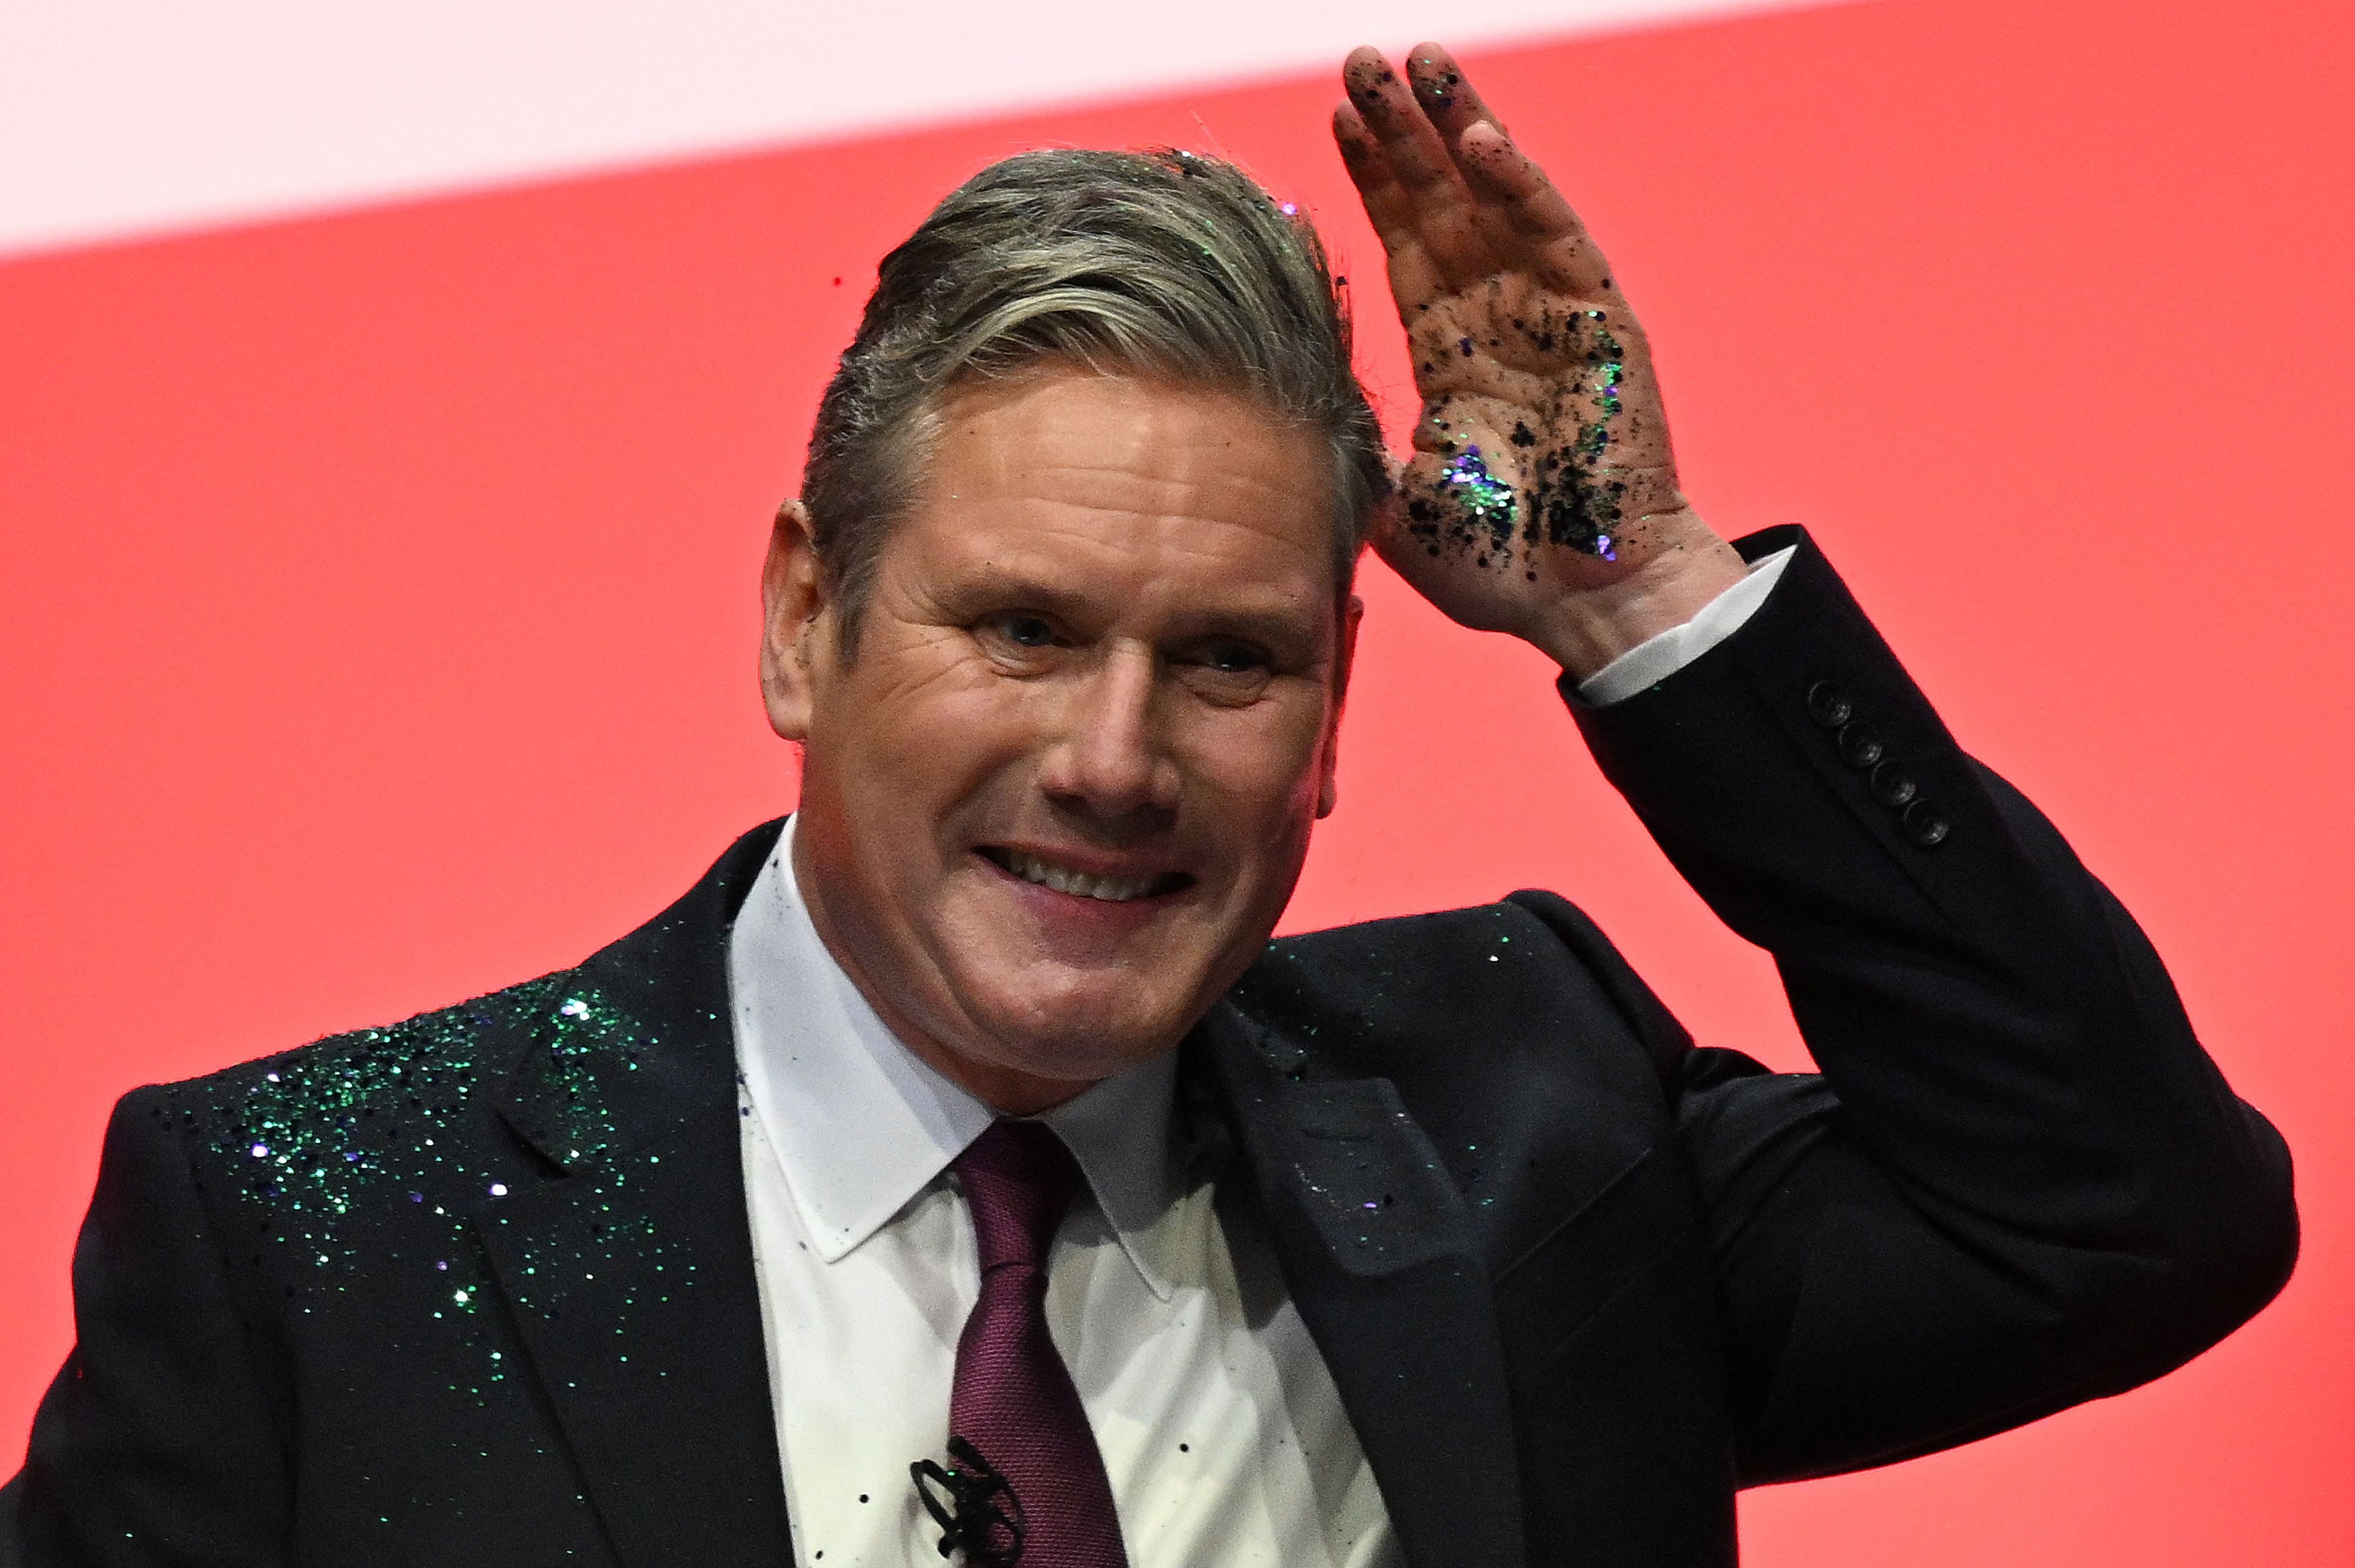 Keir Starmer’s sole new announcement was his plan to ‘bulldoze’ the planning system